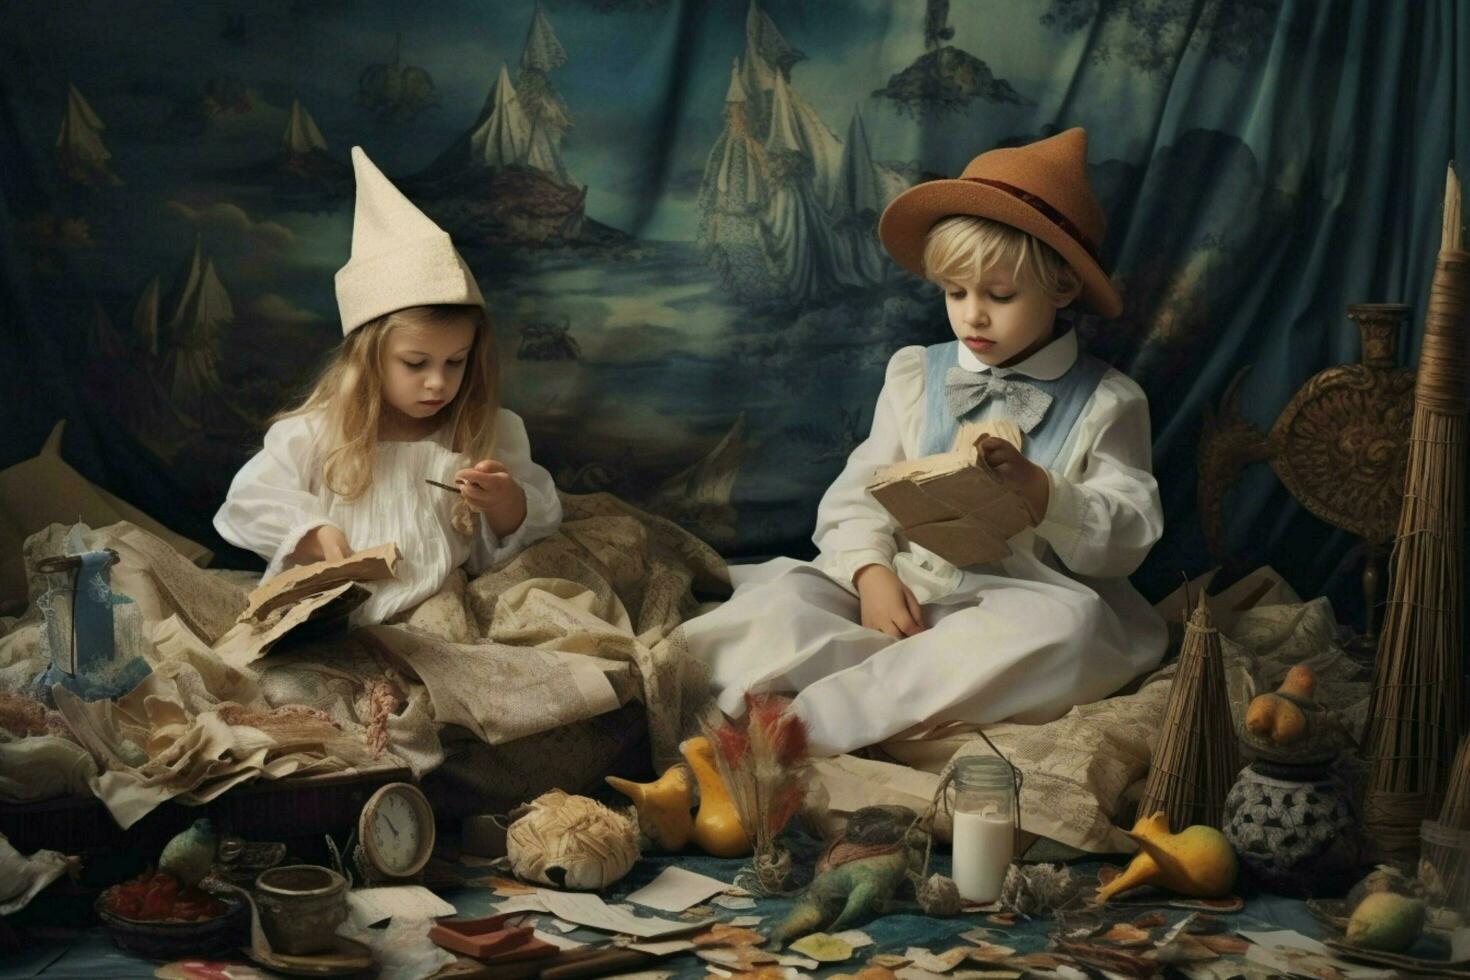 Children playing dress-up and make-believe photo